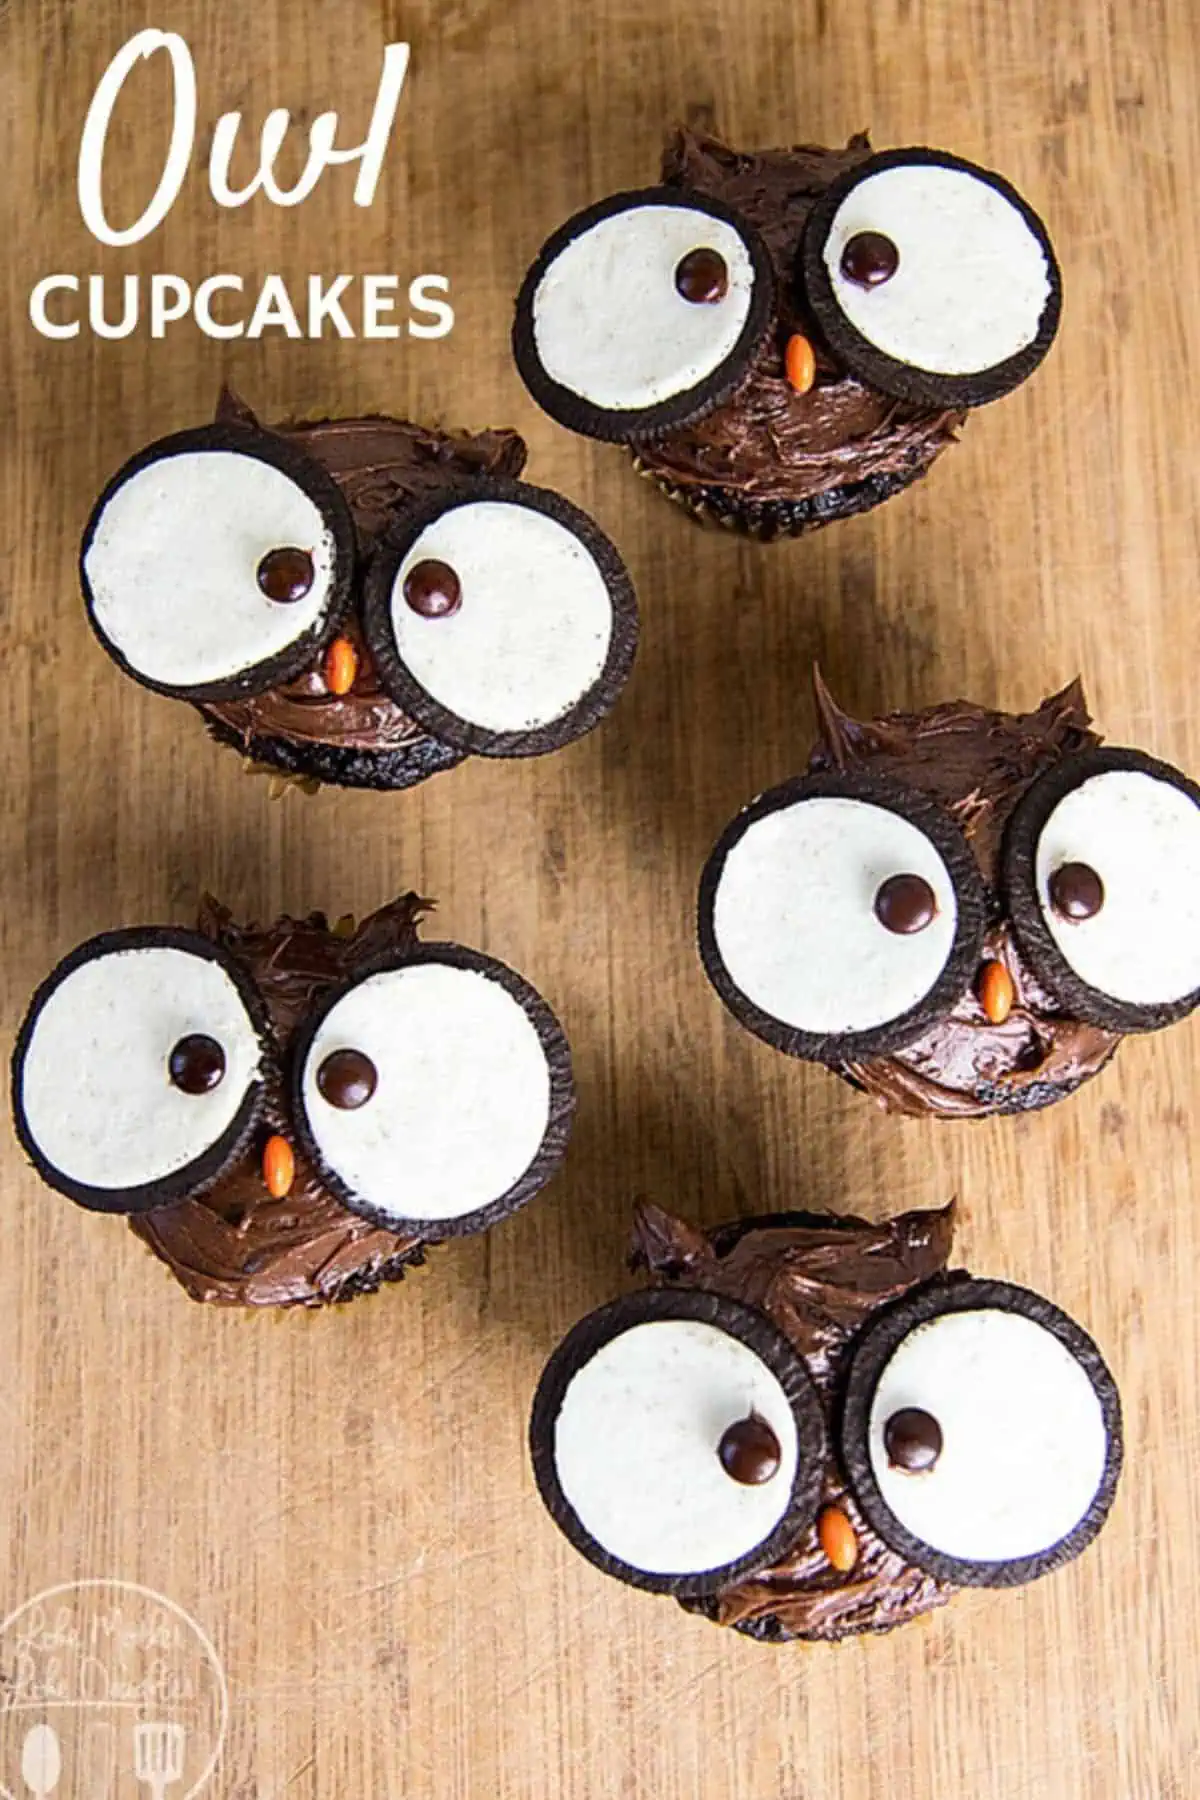 Chocolate cupcakes with open oreo eyes to look like owls